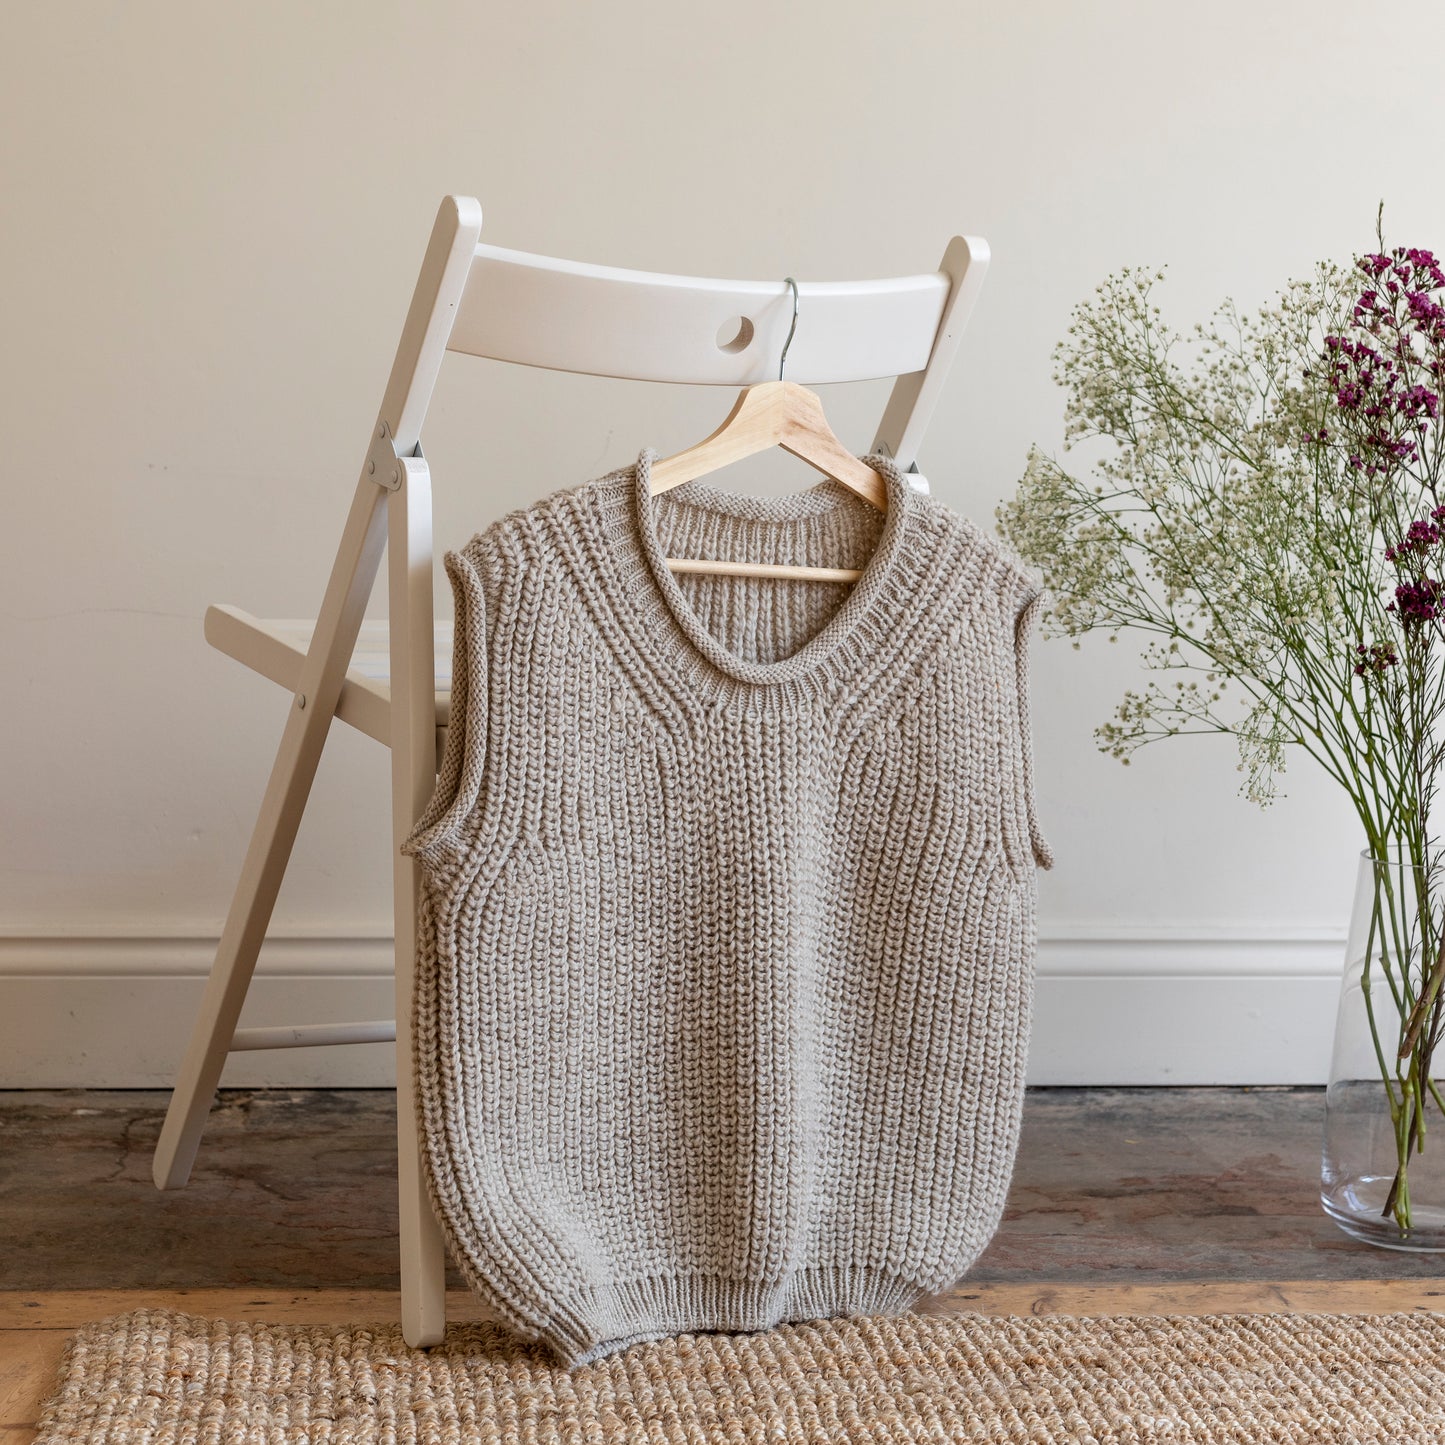 Luxury alpaca wool hand-knitted vest hanging on the back of white wooden chair. 